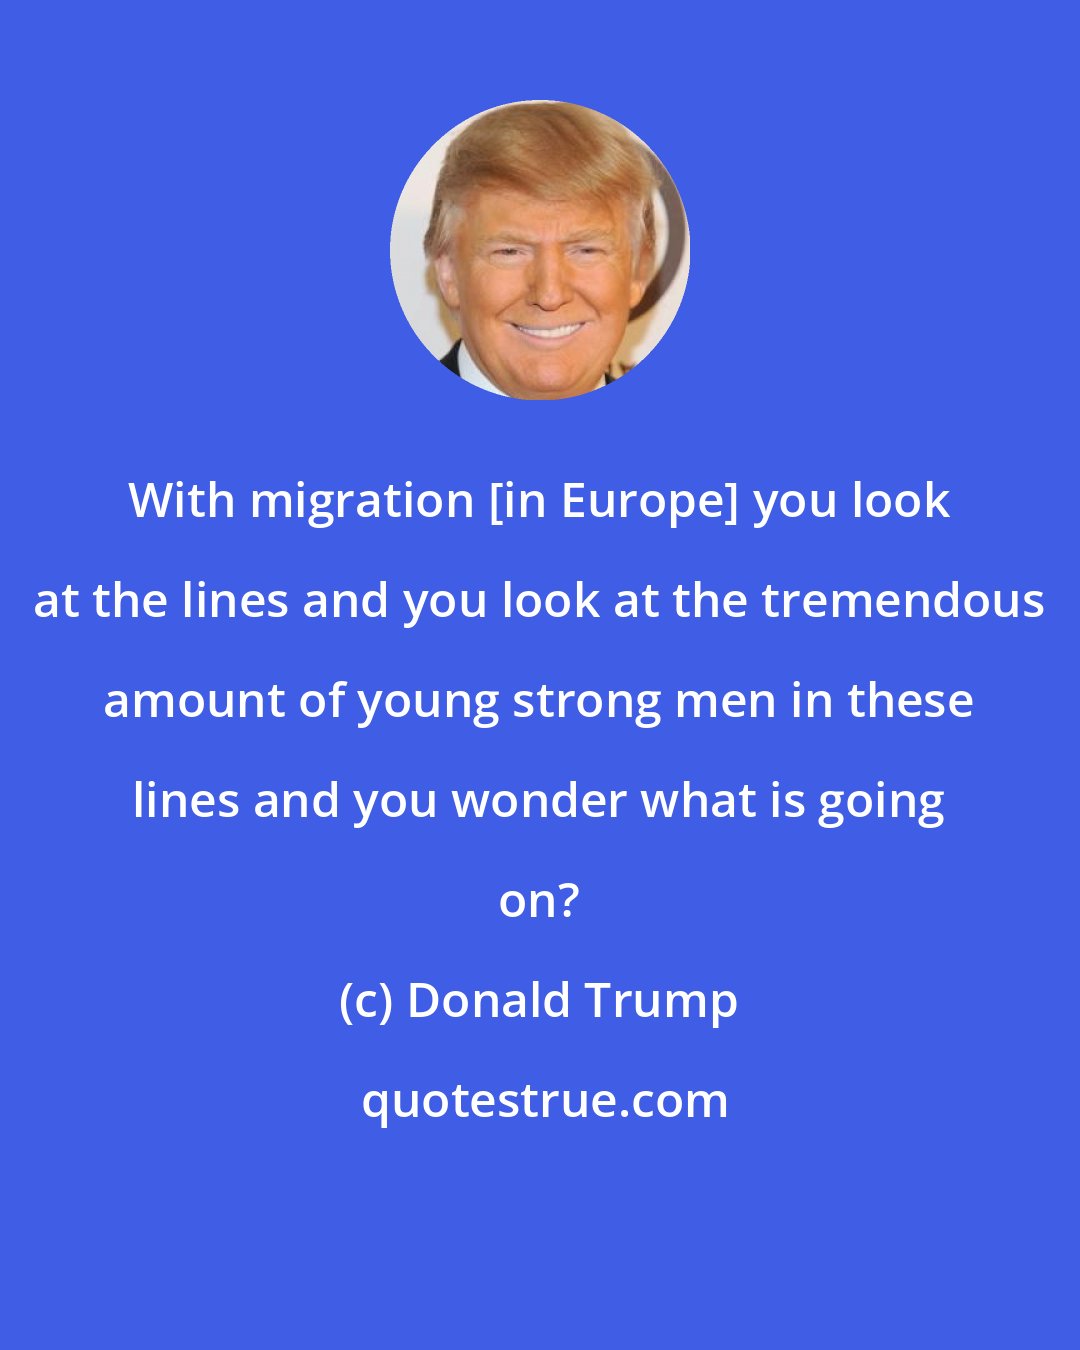 Donald Trump: With migration [in Europe] you look at the lines and you look at the tremendous amount of young strong men in these lines and you wonder what is going on?